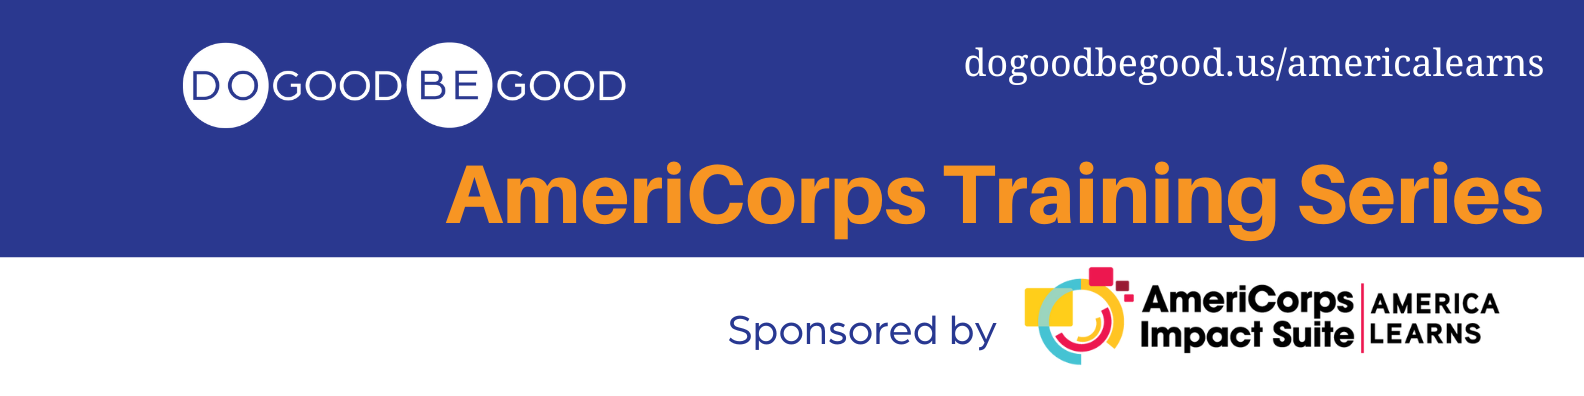 AmeriCorps Training Series sponsored by America Learns